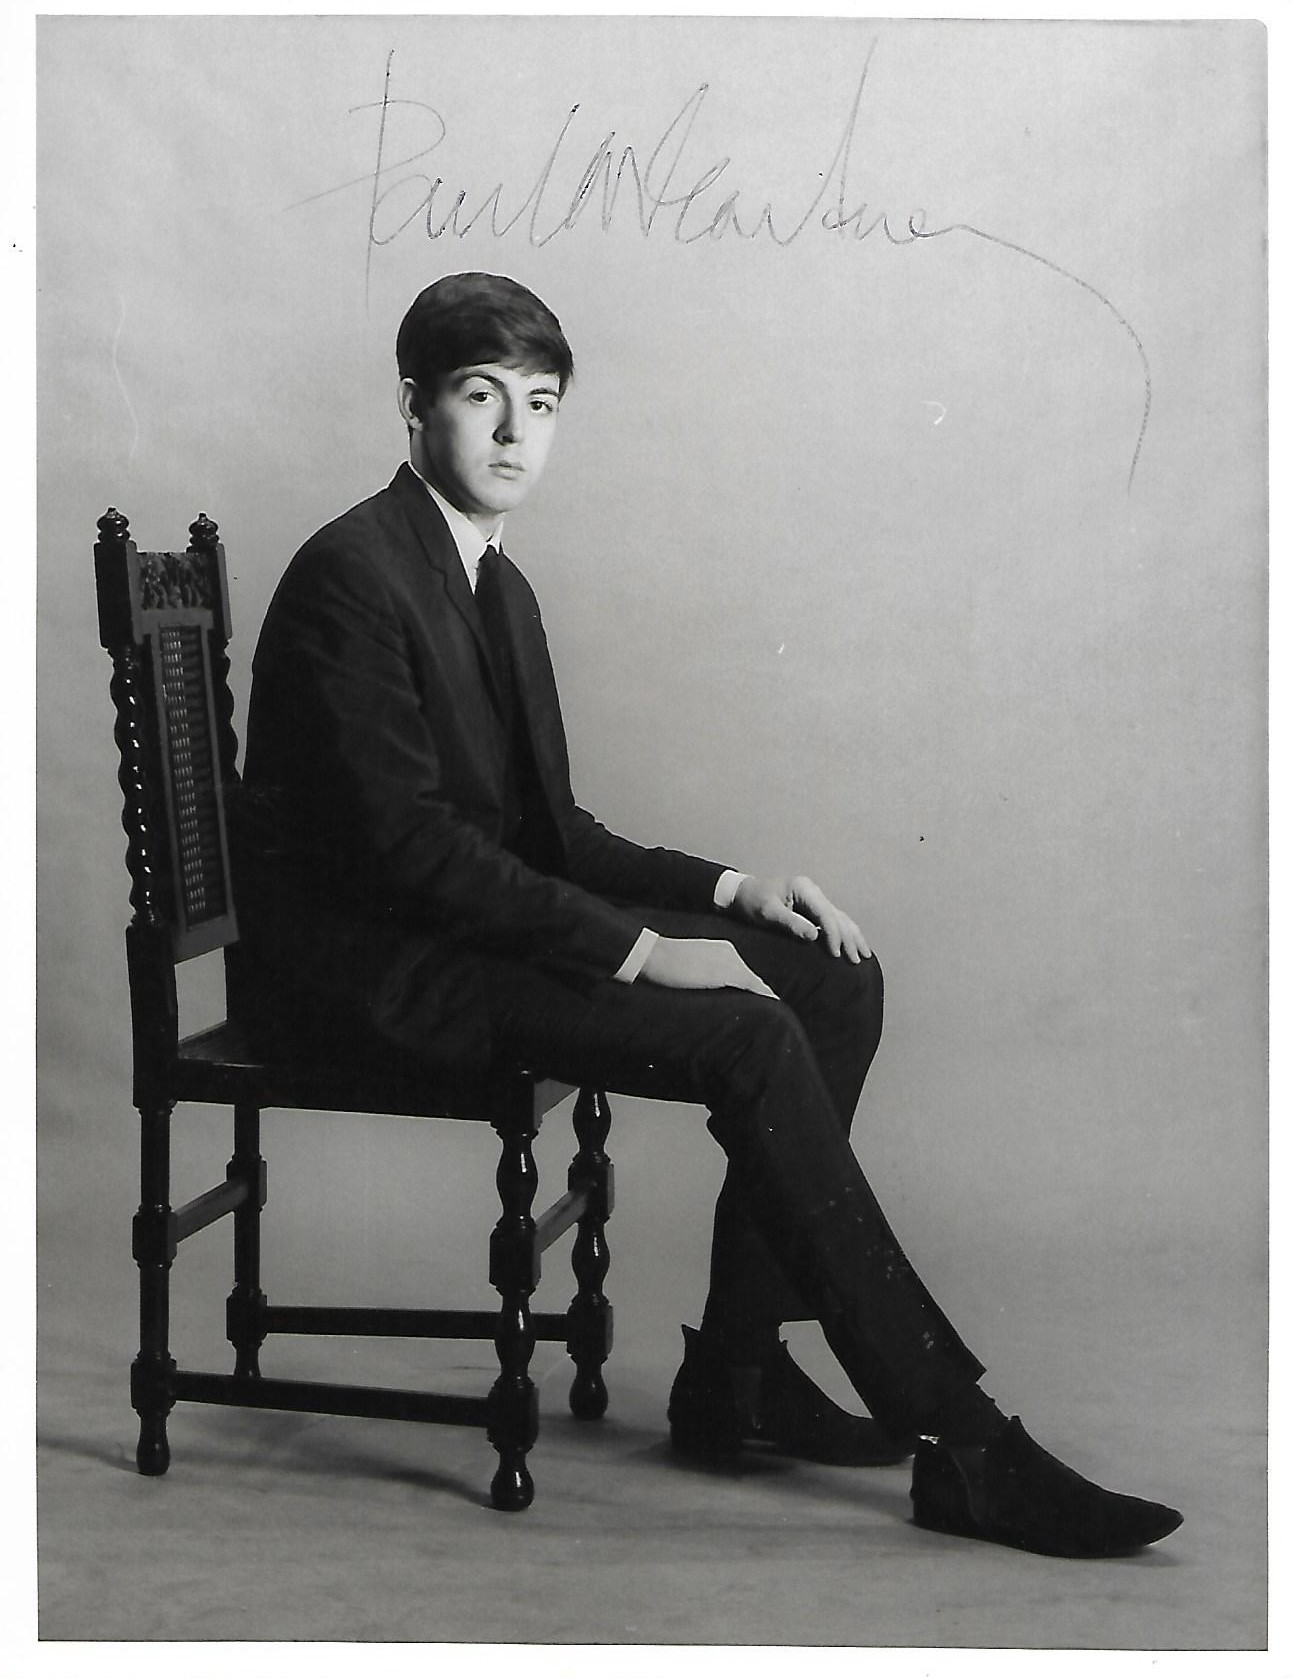 Astrid Kirchherr photograph of Paul McCartney sold at NEMS Liverpool signature on the front is by